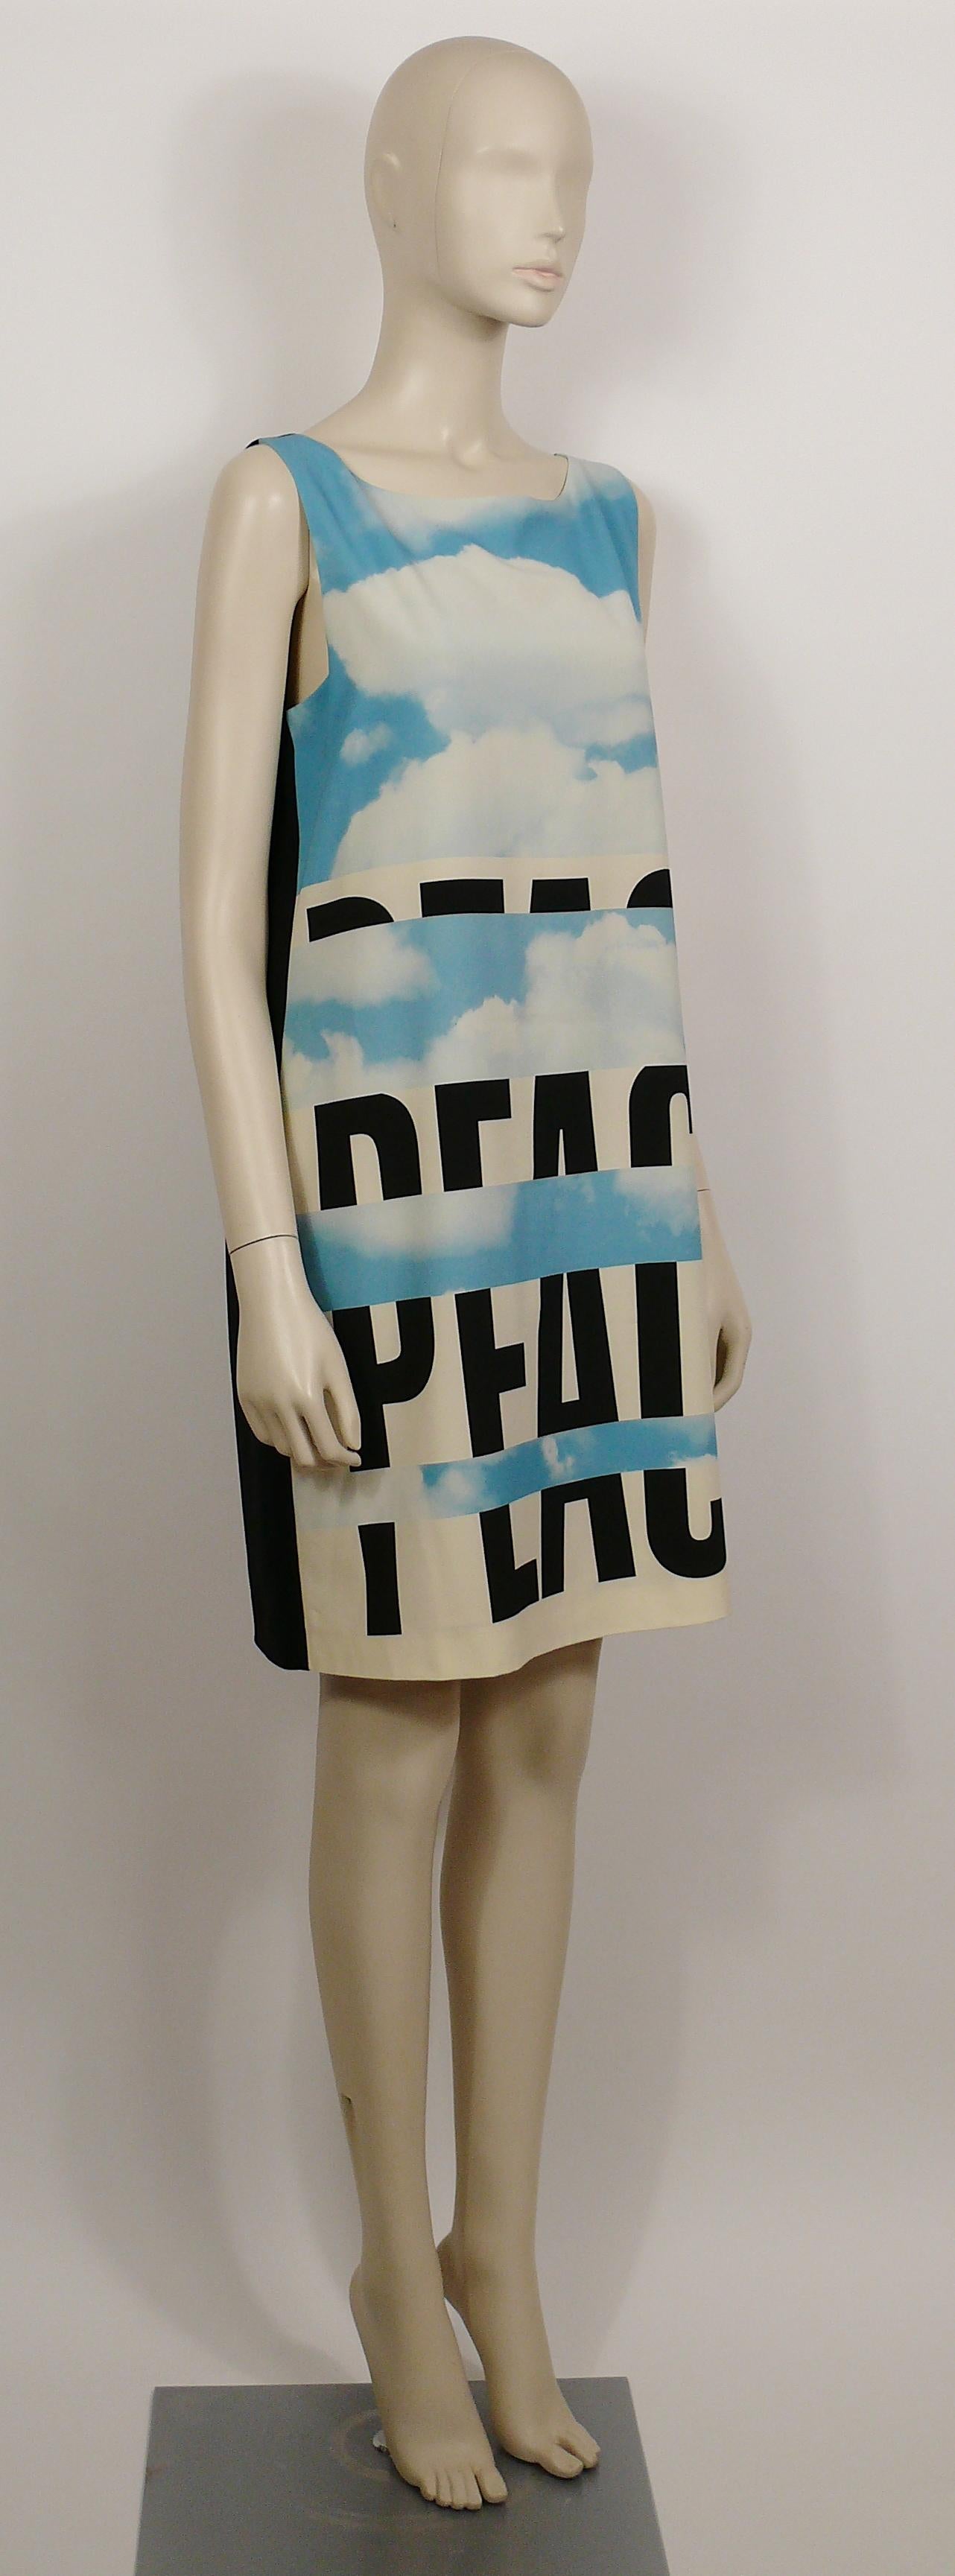 MOSCHINO light blue, off-white and black PEACE cloud print dress featuring a boat neck, a sleeveless design and a plain black back.

Slips on.
Back zippered closure.
Fully lined.

Label reads MOSCHINO Cheap and Chic.

Size tag reads : I 44 / D 40 /